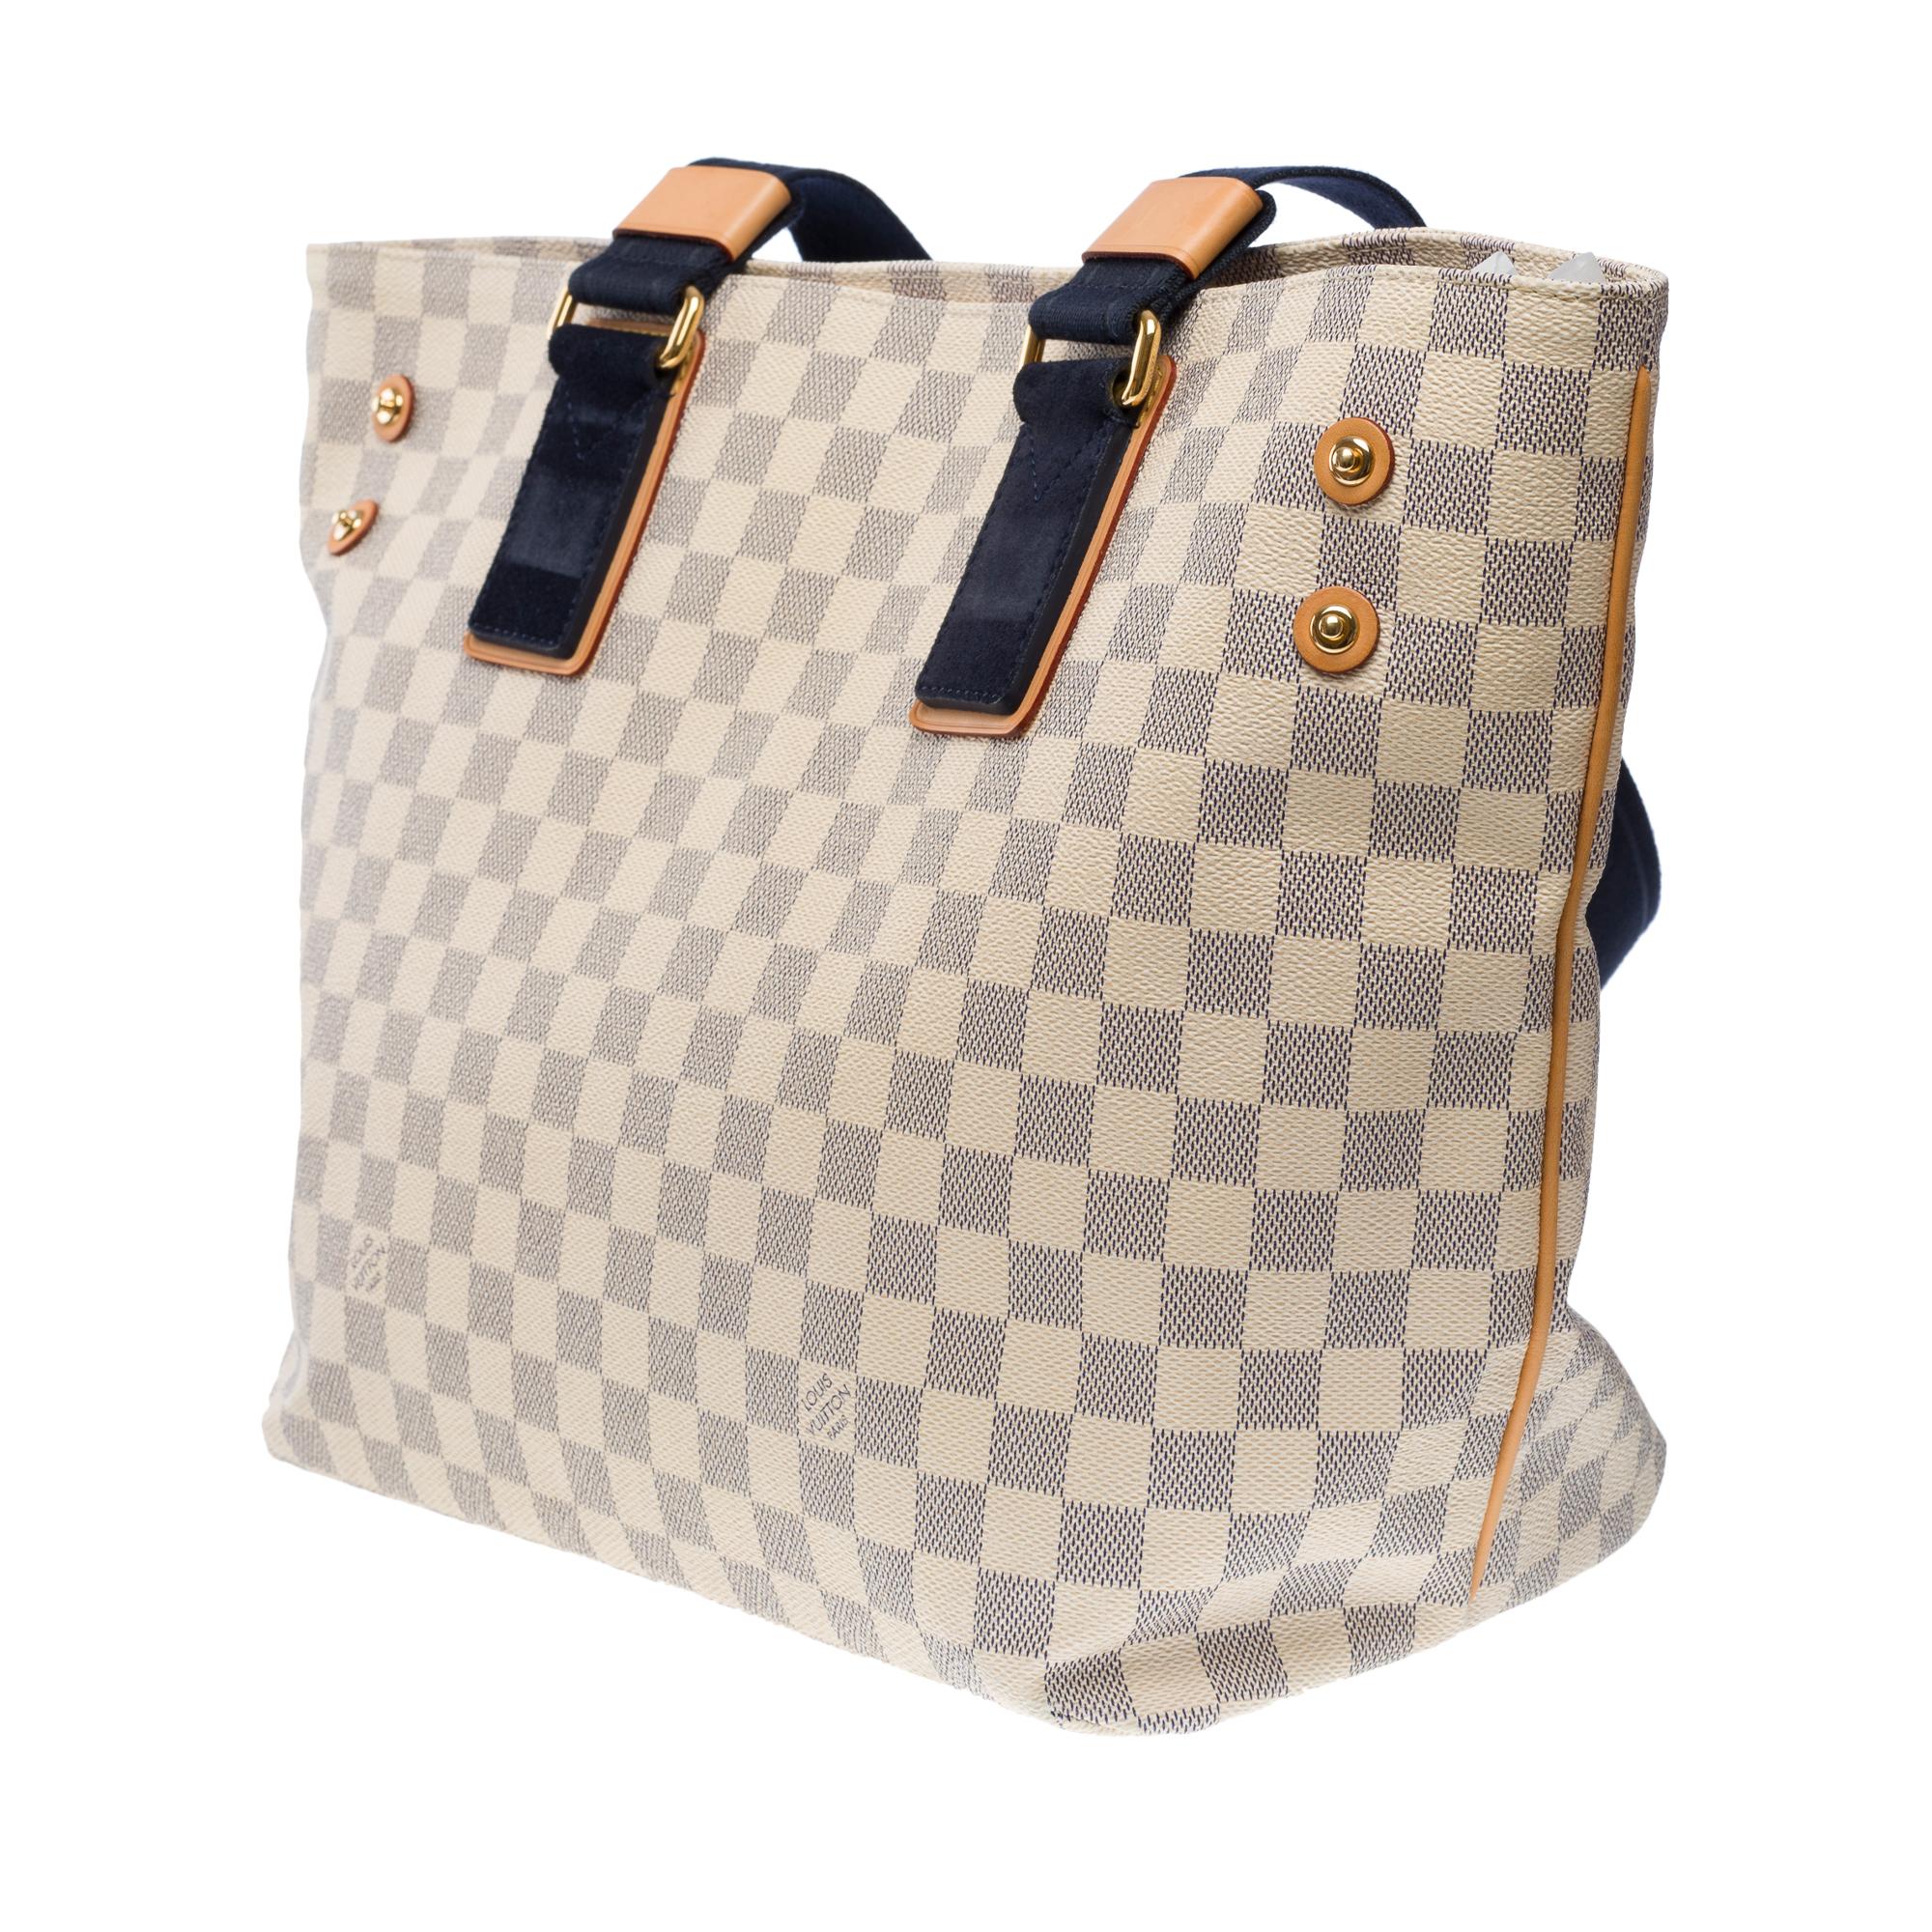 Amazing Louis Vuitton Tote bag in azur checkered canvas, GHW For Sale 2